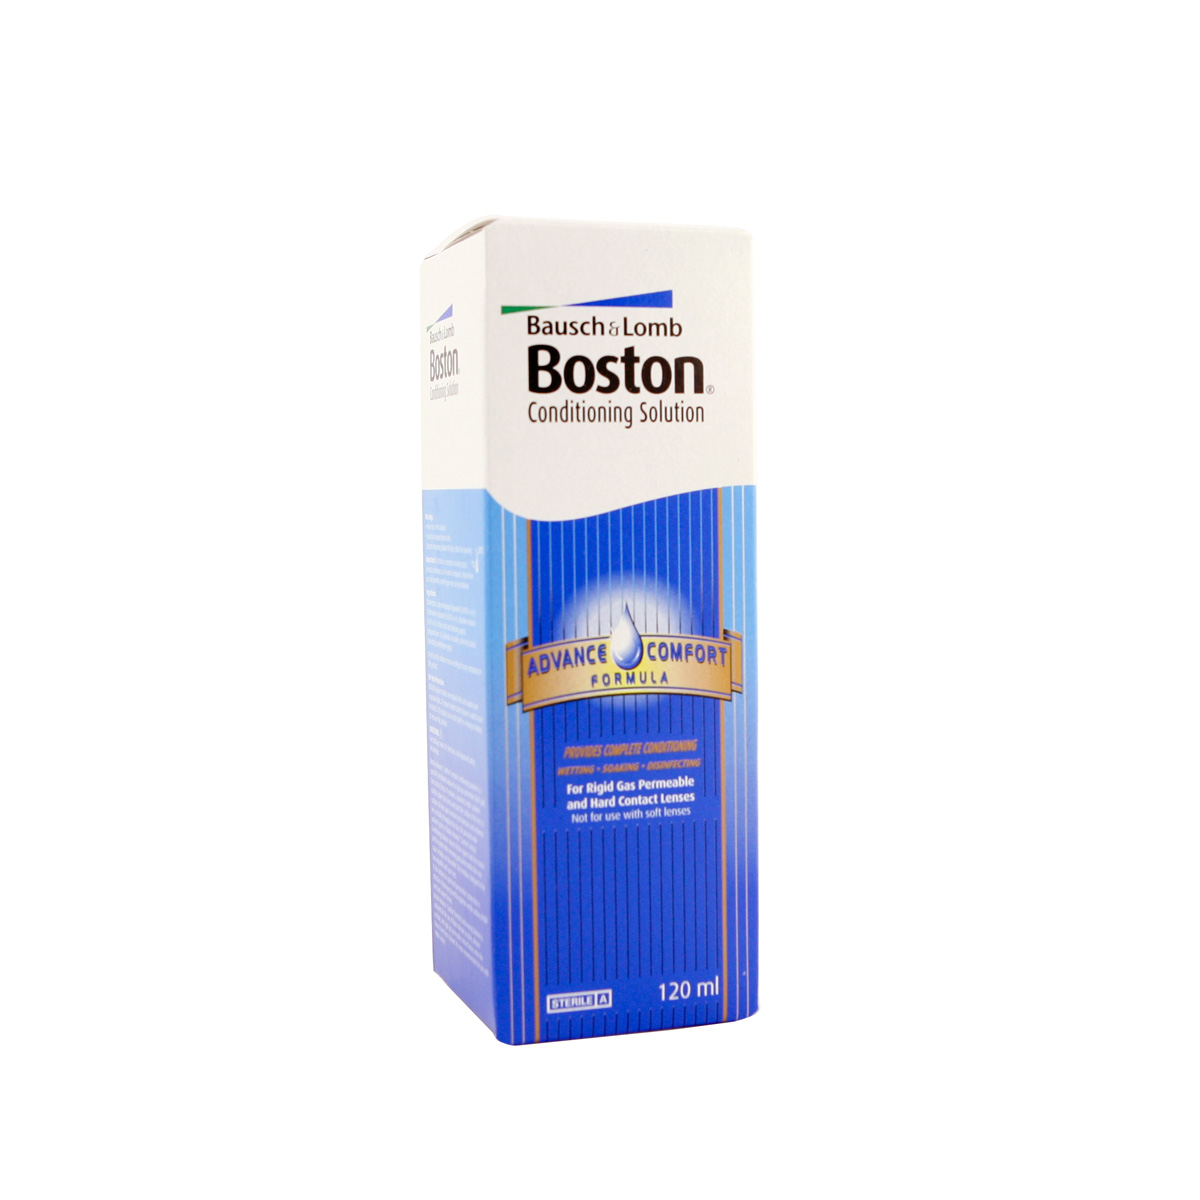 Image of Boston Conditioning Solution 120ml